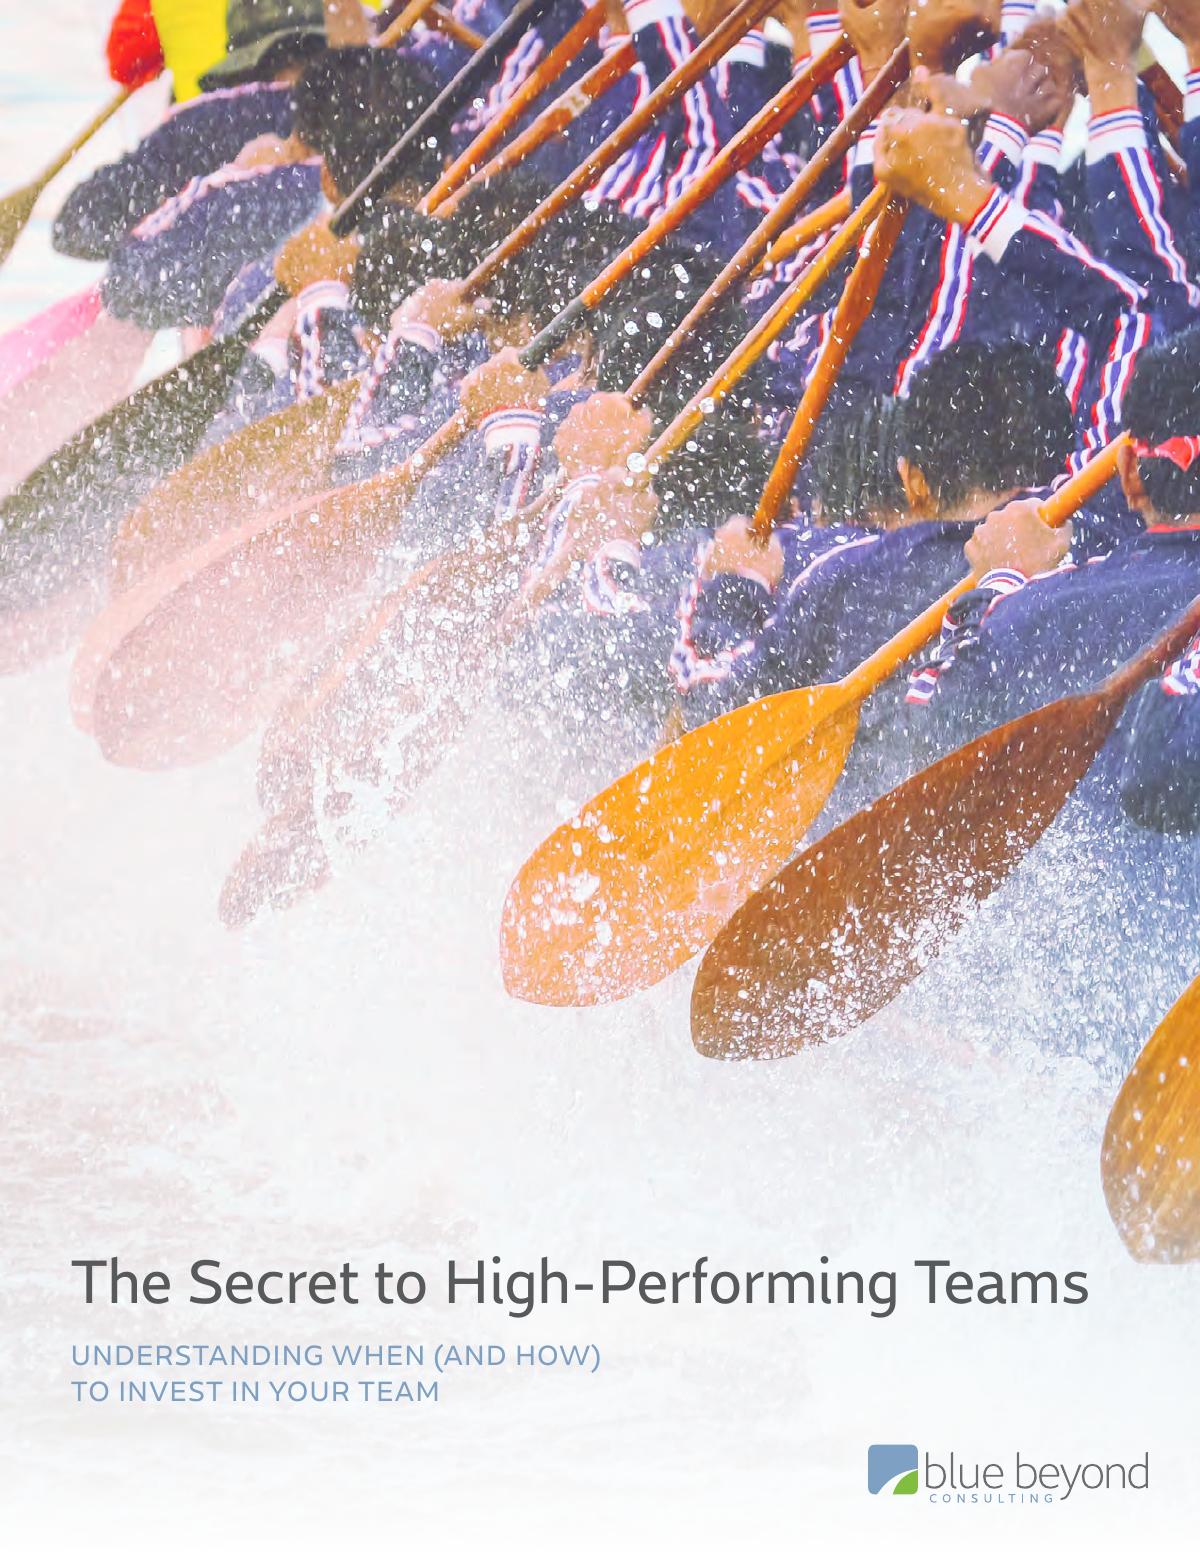 The Secret to High-Performing Teams